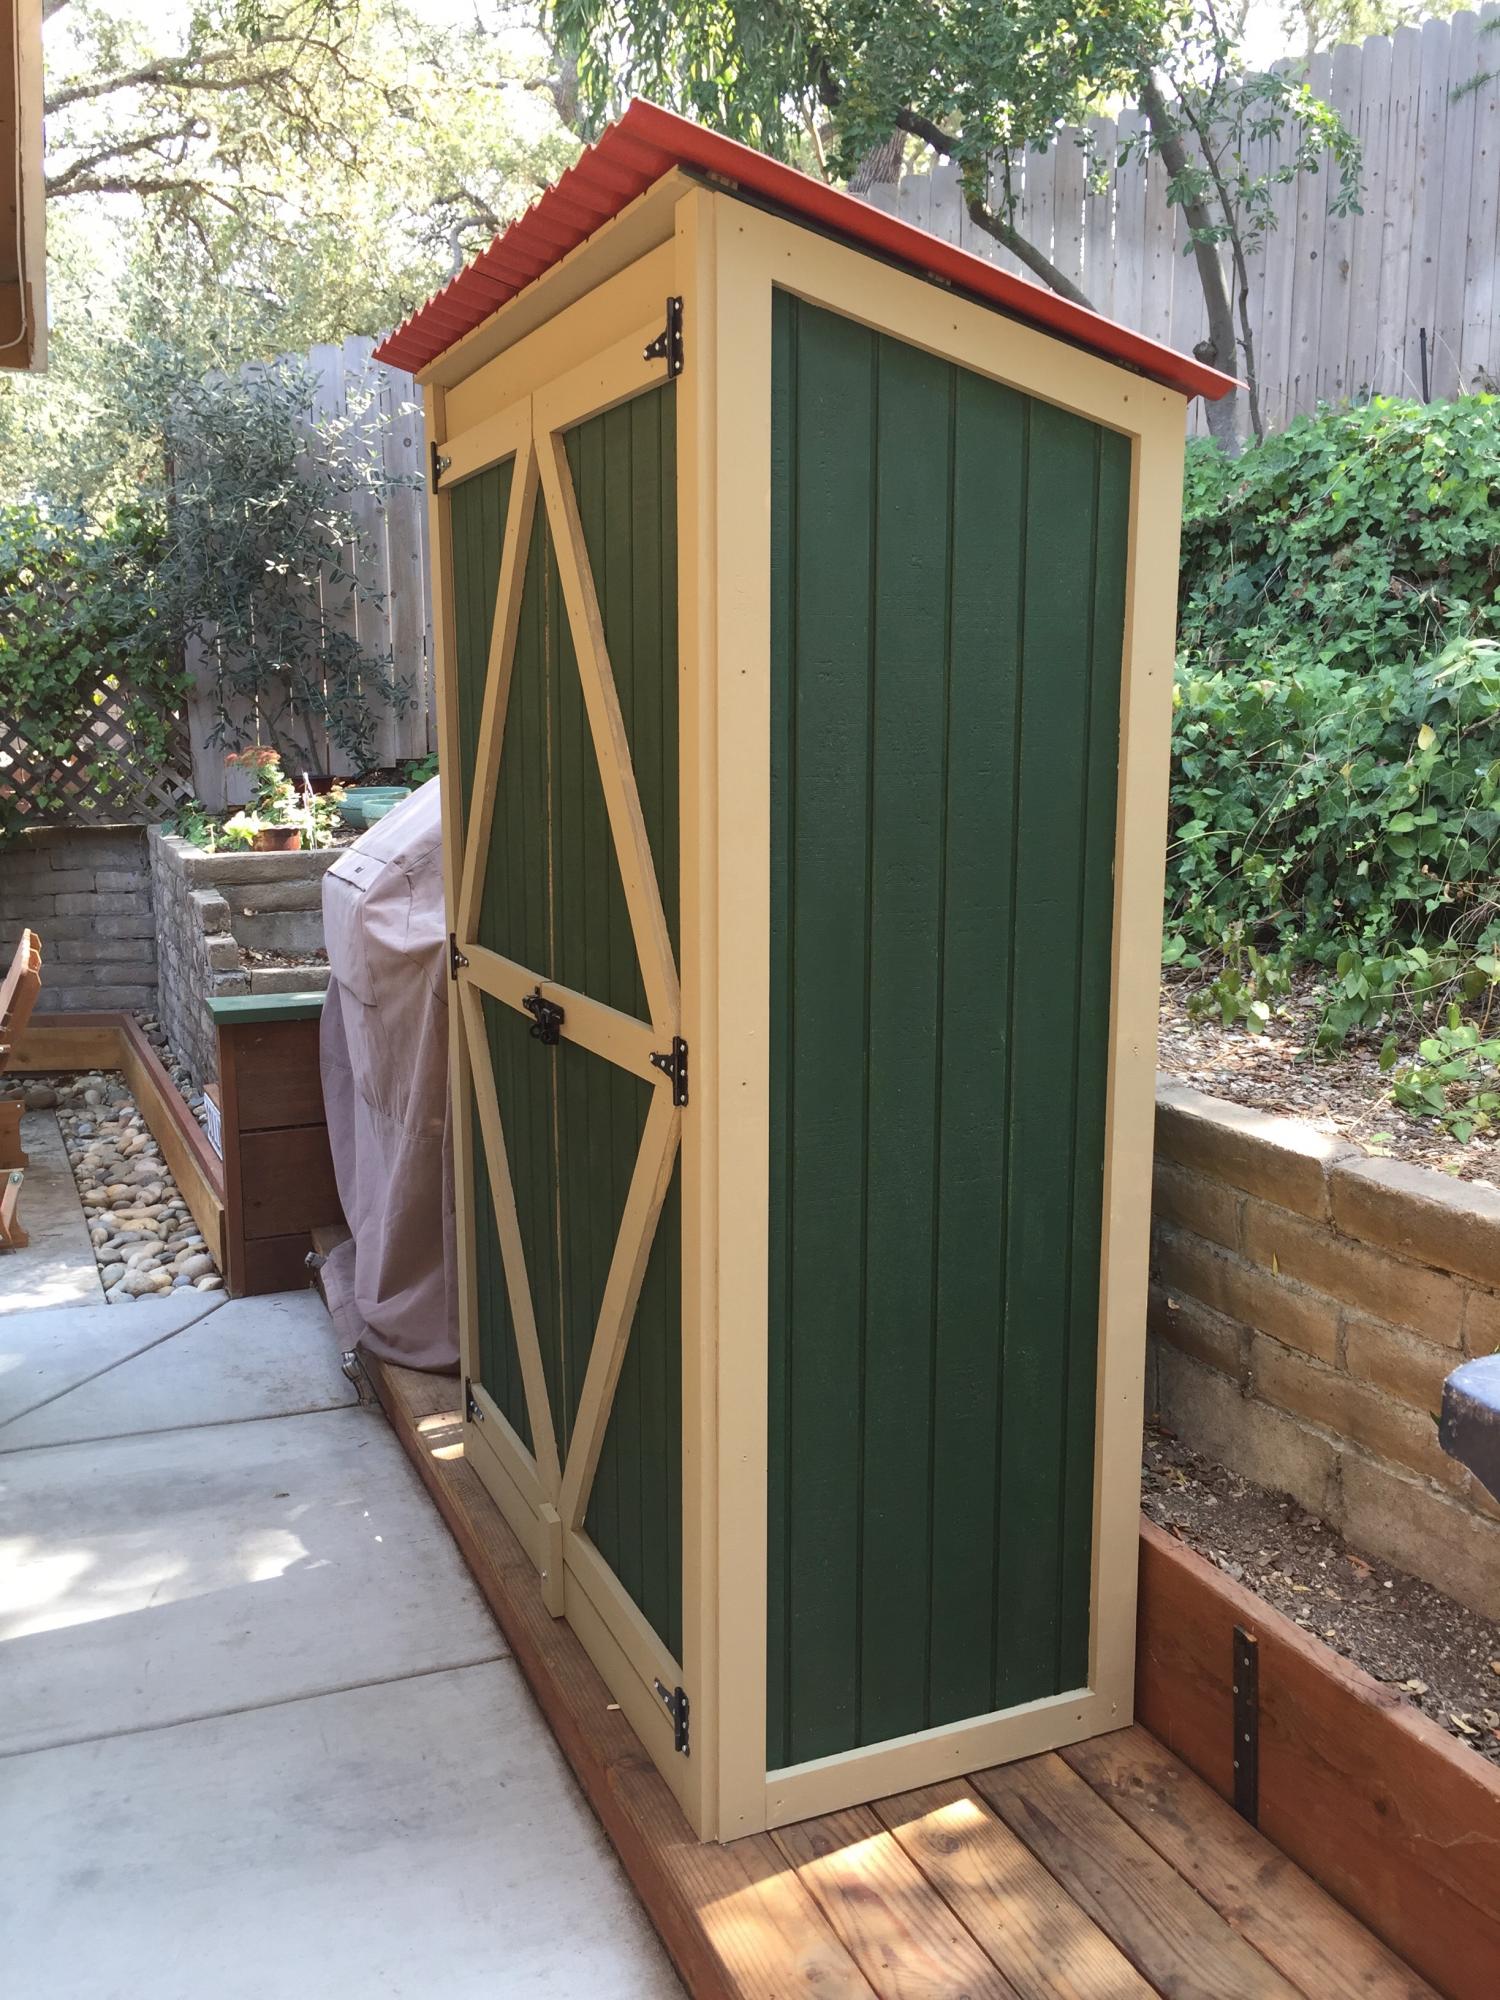 Garden Tool Shed based on plans for Small Outdoor Shed Ana White